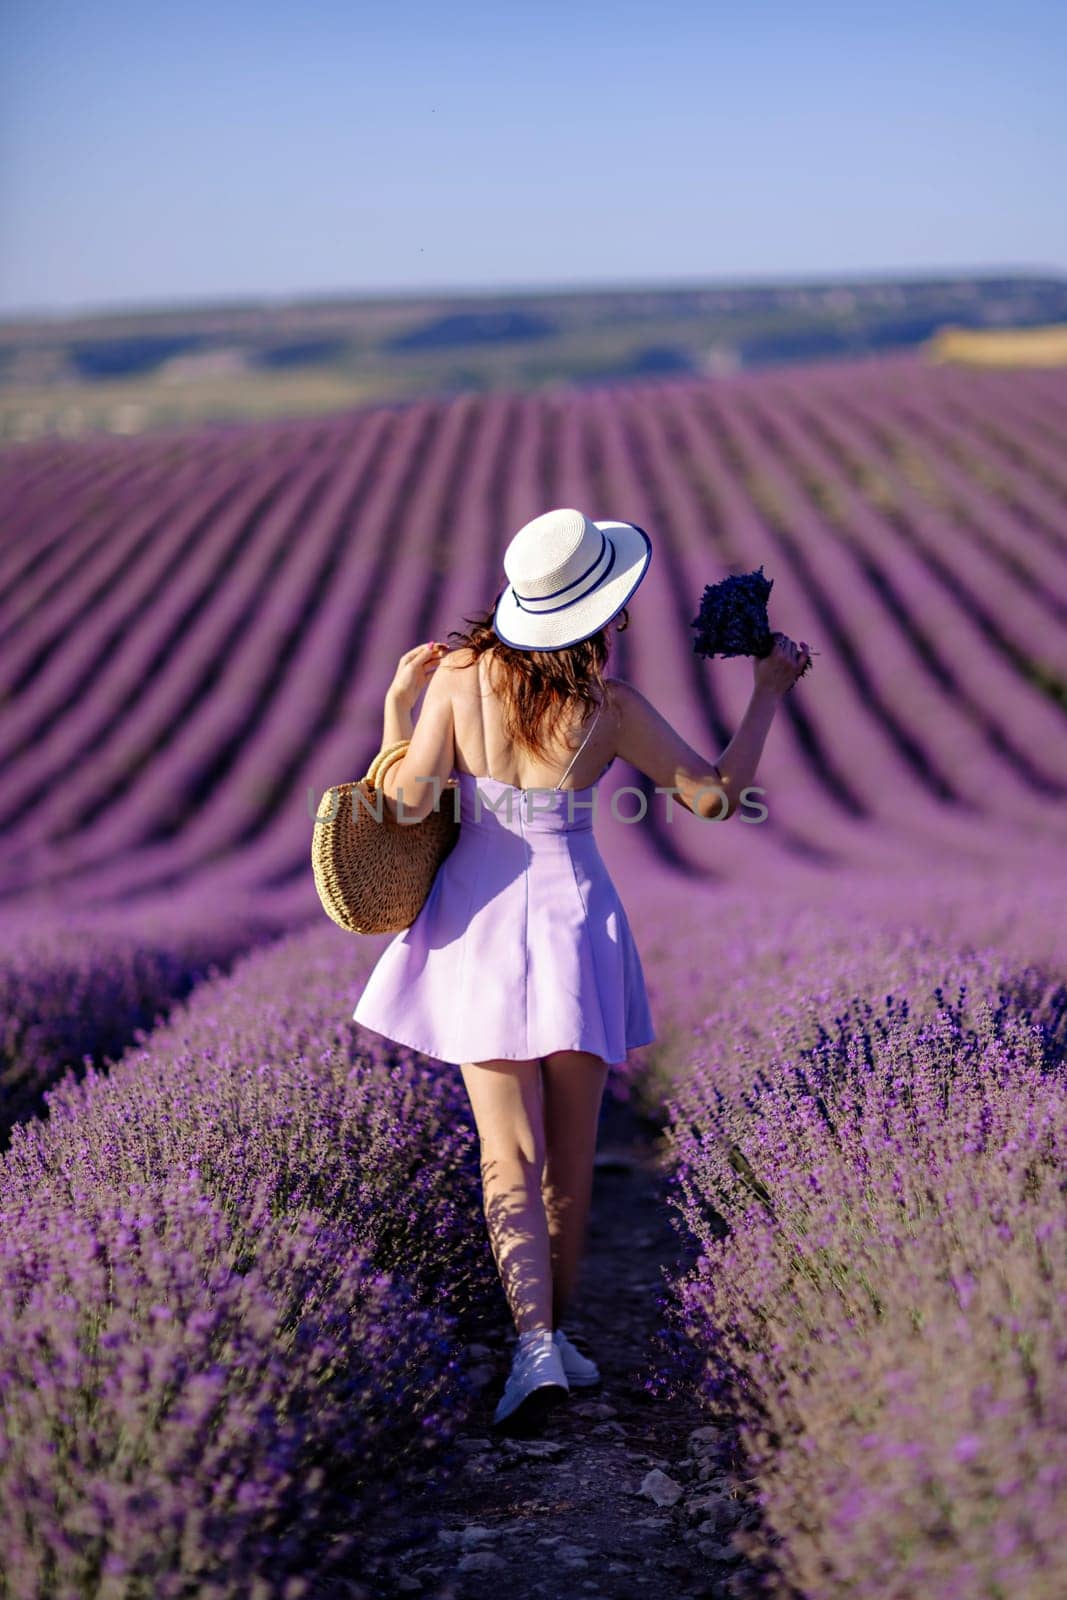 A woman wearing a white hat and a purple dress walks through a field of lavender. The scene is serene and peaceful, with the woman enjoying the beauty of the flowers and the fresh air. by Matiunina